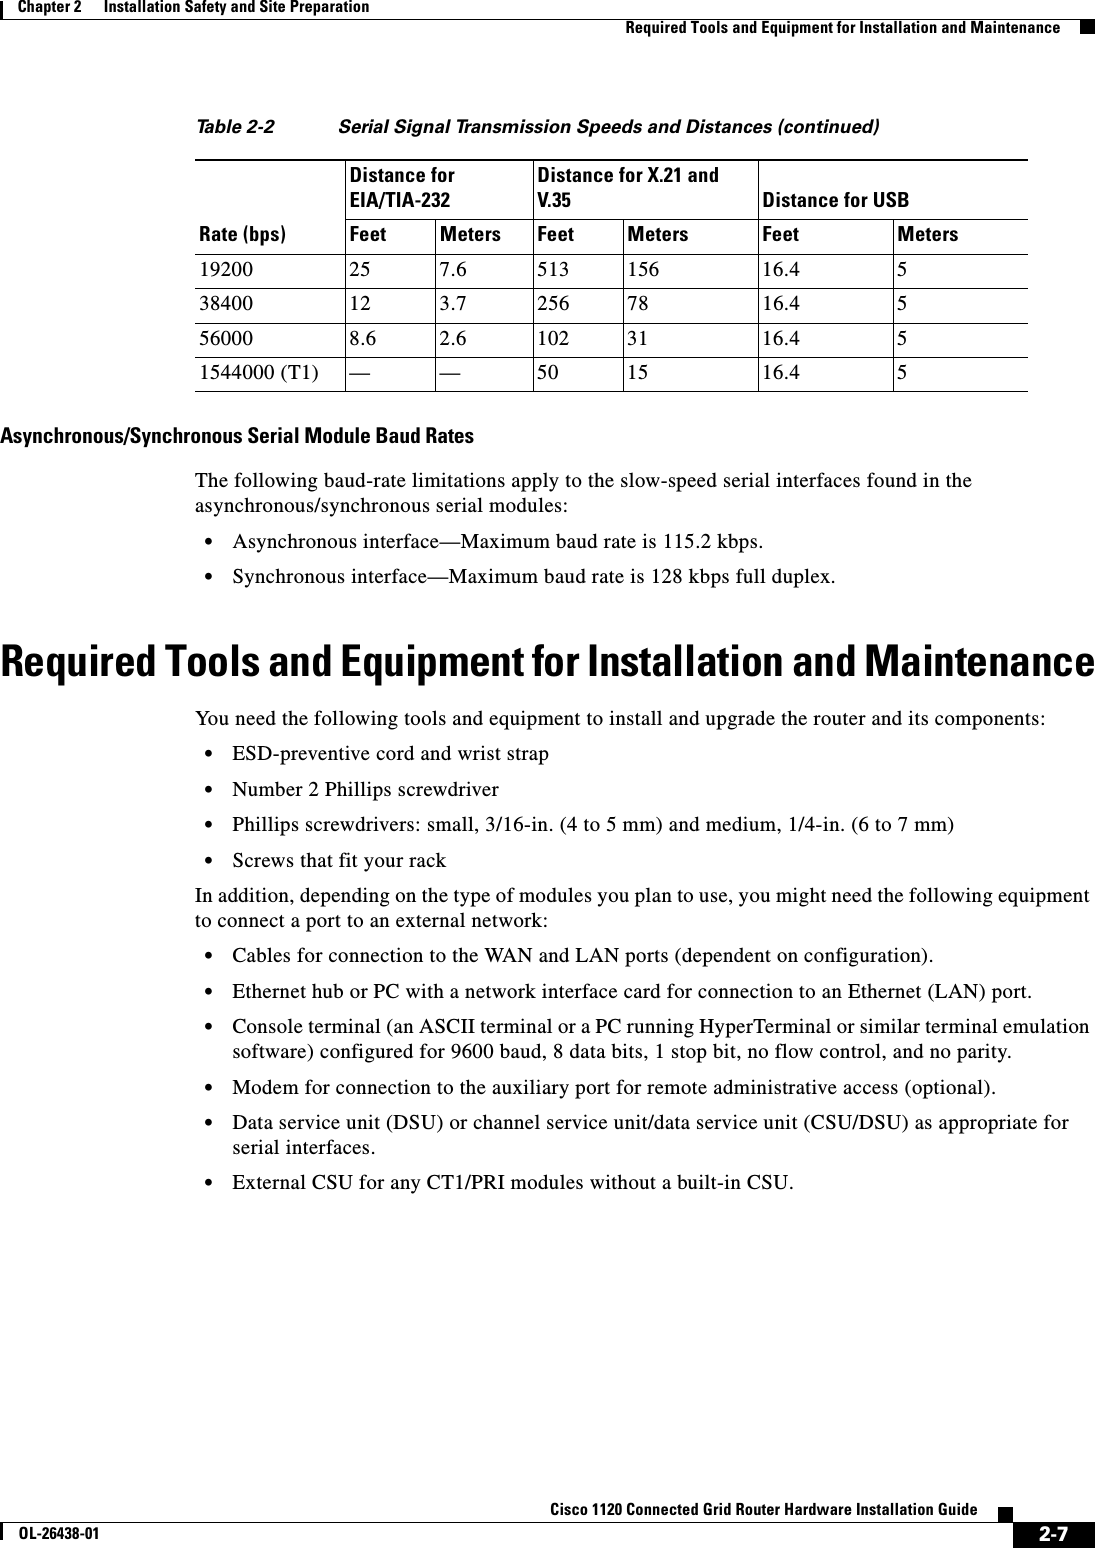  2-7Cisco 1120 Connected Grid Router Hardware Installation GuideOL-26438-01Chapter 2      Installation Safety and Site Preparation  Required Tools and Equipment for Installation and MaintenanceAsynchronous/Synchronous Serial Module Baud RatesThe following baud-rate limitations apply to the slow-speed serial interfaces found in the asynchronous/synchronous serial modules:•Asynchronous interface—Maximum baud rate is 115.2 kbps.•Synchronous interface—Maximum baud rate is 128 kbps full duplex.Required Tools and Equipment for Installation and MaintenanceYou need the following tools and equipment to install and upgrade the router and its components:•ESD-preventive cord and wrist strap•Number 2 Phillips screwdriver•Phillips screwdrivers: small, 3/16-in. (4 to 5 mm) and medium, 1/4-in. (6 to 7 mm)•Screws that fit your rackIn addition, depending on the type of modules you plan to use, you might need the following equipment to connect a port to an external network:•Cables for connection to the WAN and LAN ports (dependent on configuration).•Ethernet hub or PC with a network interface card for connection to an Ethernet (LAN) port.•Console terminal (an ASCII terminal or a PC running HyperTerminal or similar terminal emulation software) configured for 9600 baud, 8 data bits, 1 stop bit, no flow control, and no parity.•Modem for connection to the auxiliary port for remote administrative access (optional).•Data service unit (DSU) or channel service unit/data service unit (CSU/DSU) as appropriate for serial interfaces.•External CSU for any CT1/PRI modules without a built-in CSU.19200 25 7.6 513 156 16.4 538400 12 3.7 256 78 16.4 556000 8.6 2.6 102 31 16.4 51544000 (T1) — — 50 15 16.4 5Table 2-2 Serial Signal Transmission Speeds and Distances (continued)Distance for EIA/TIA-232 Distance for X.21 and V.35 Distance for USBRate (bps) Feet Meters Feet Meters Feet Meters